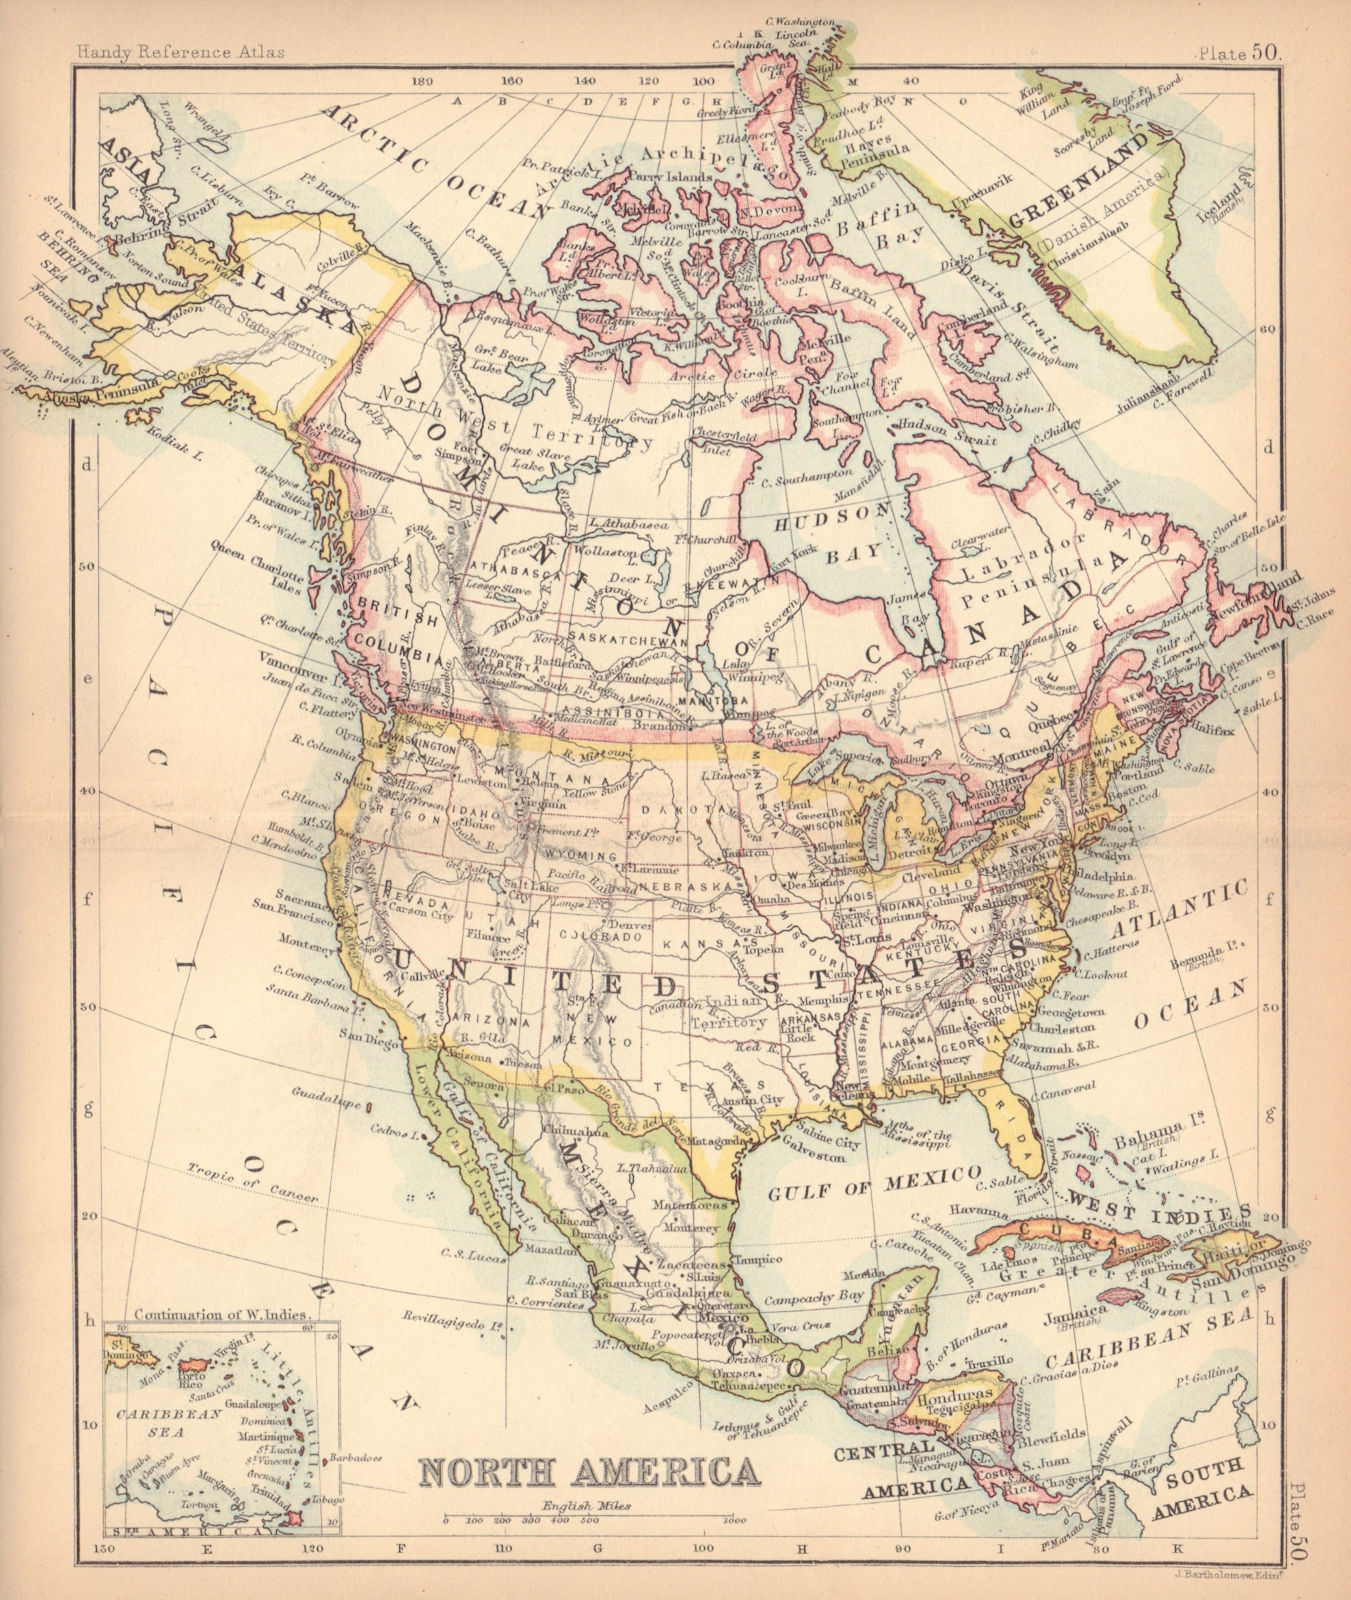 Associate Product North America. United States Canada Mexico. BARTHOLOMEW 1888 old antique map